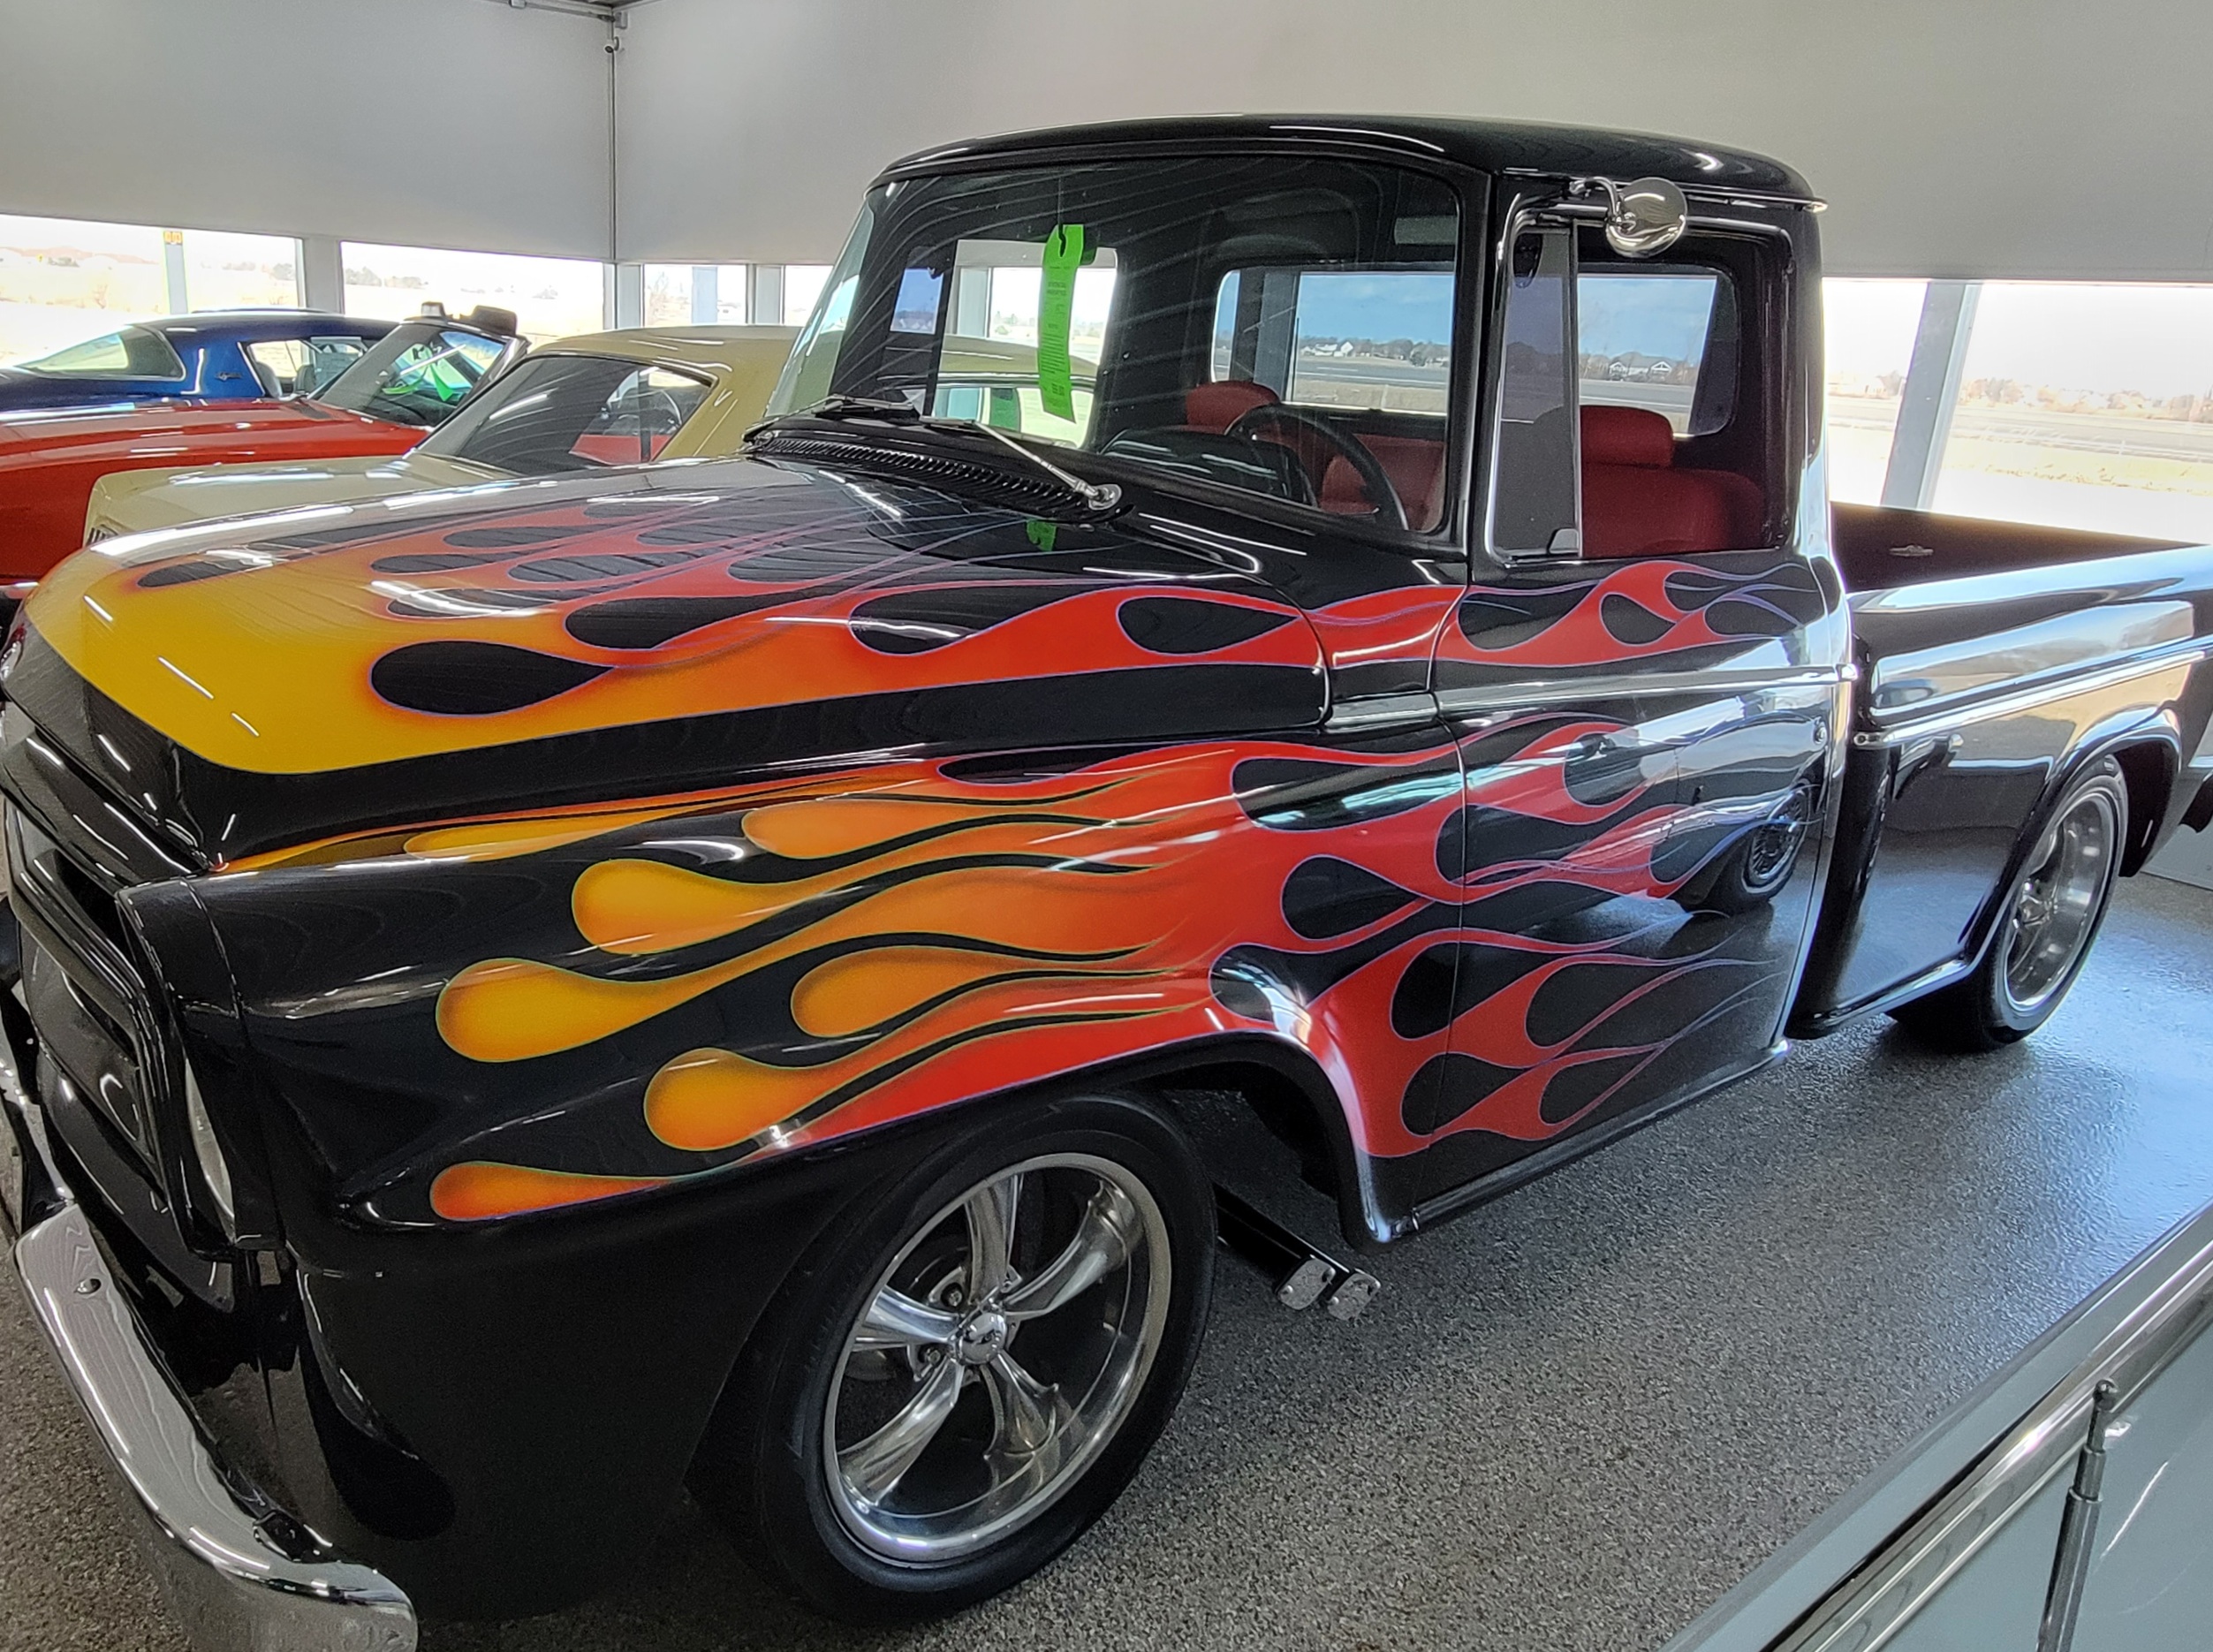 Almost Perfect $100 Paint Job - Tractor Paint On A 1957 Chevy